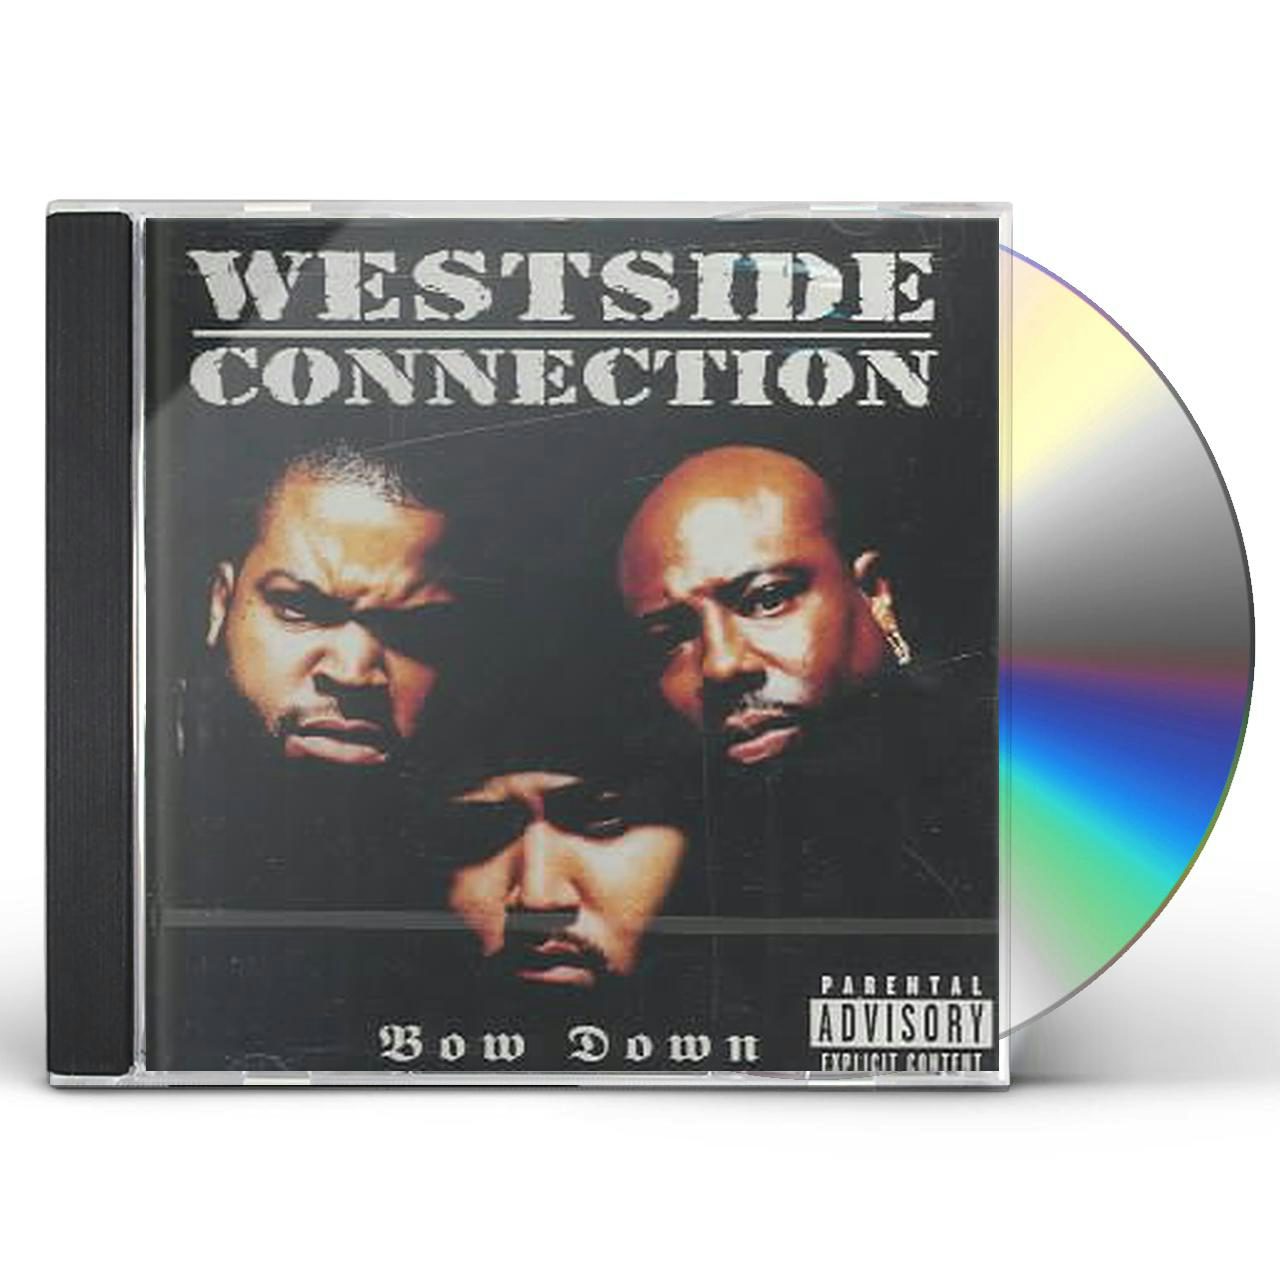 Westside Connection BOW DOWN CD $17.49$15.49